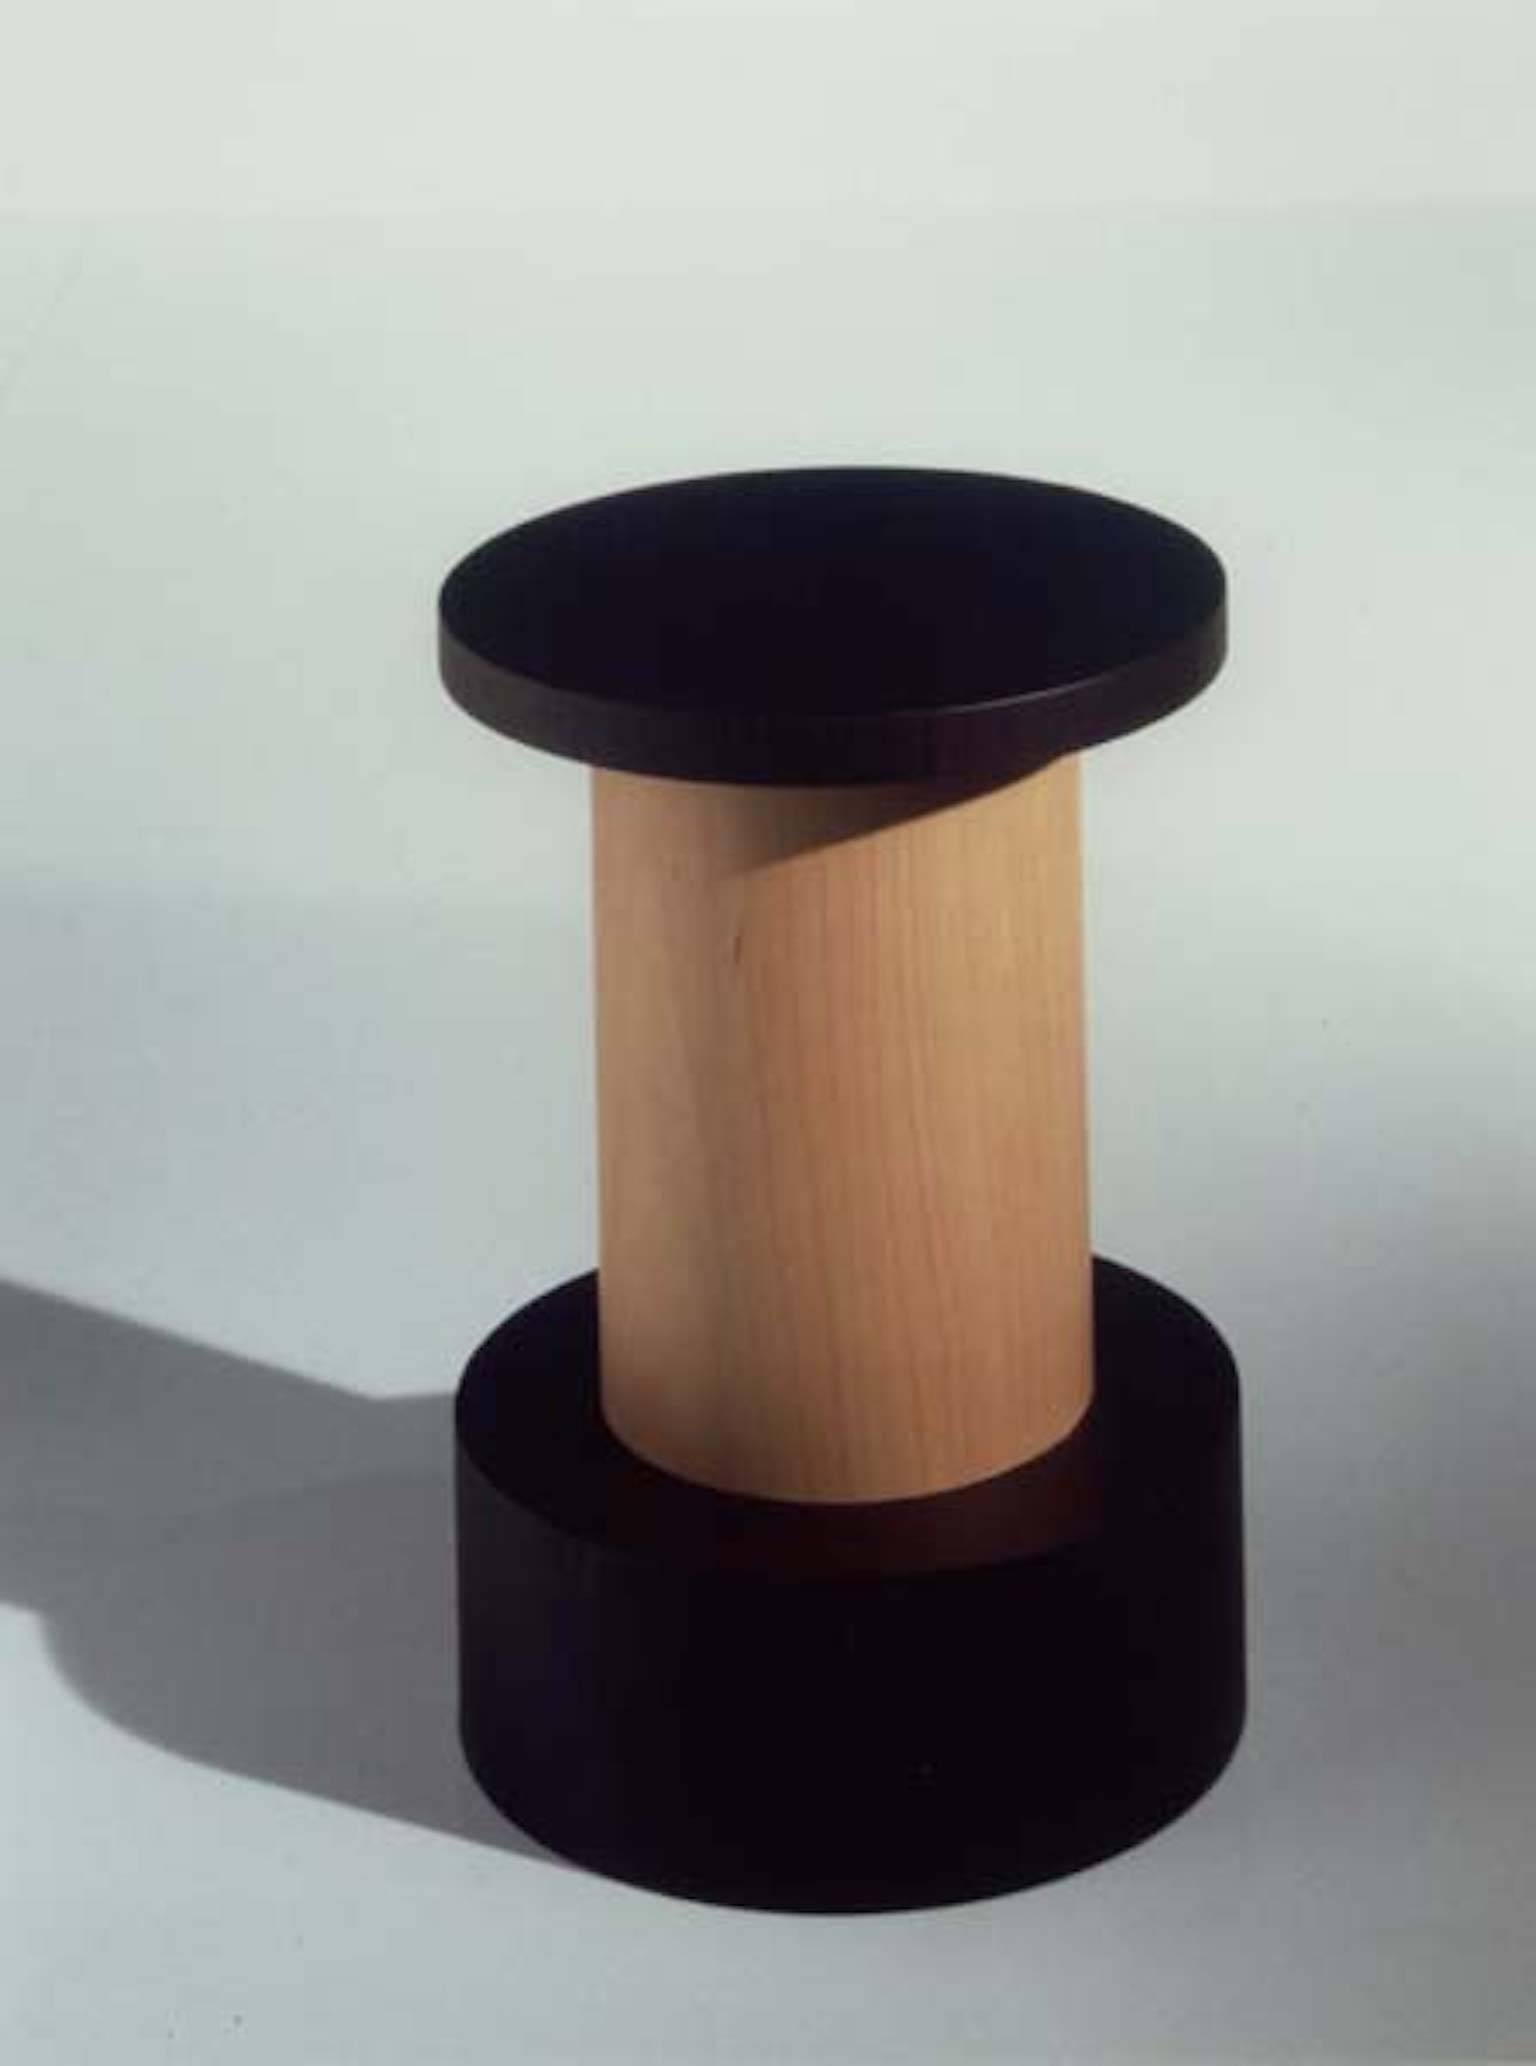 A table designed by Ettore Sottsass for Oak Design Edizioni in 2000 for the exhibition Italy, Japan. Exotic wood and stained ash circular pedestal. Producer's metallic plate. Limited edition of 20 copies. Out production.